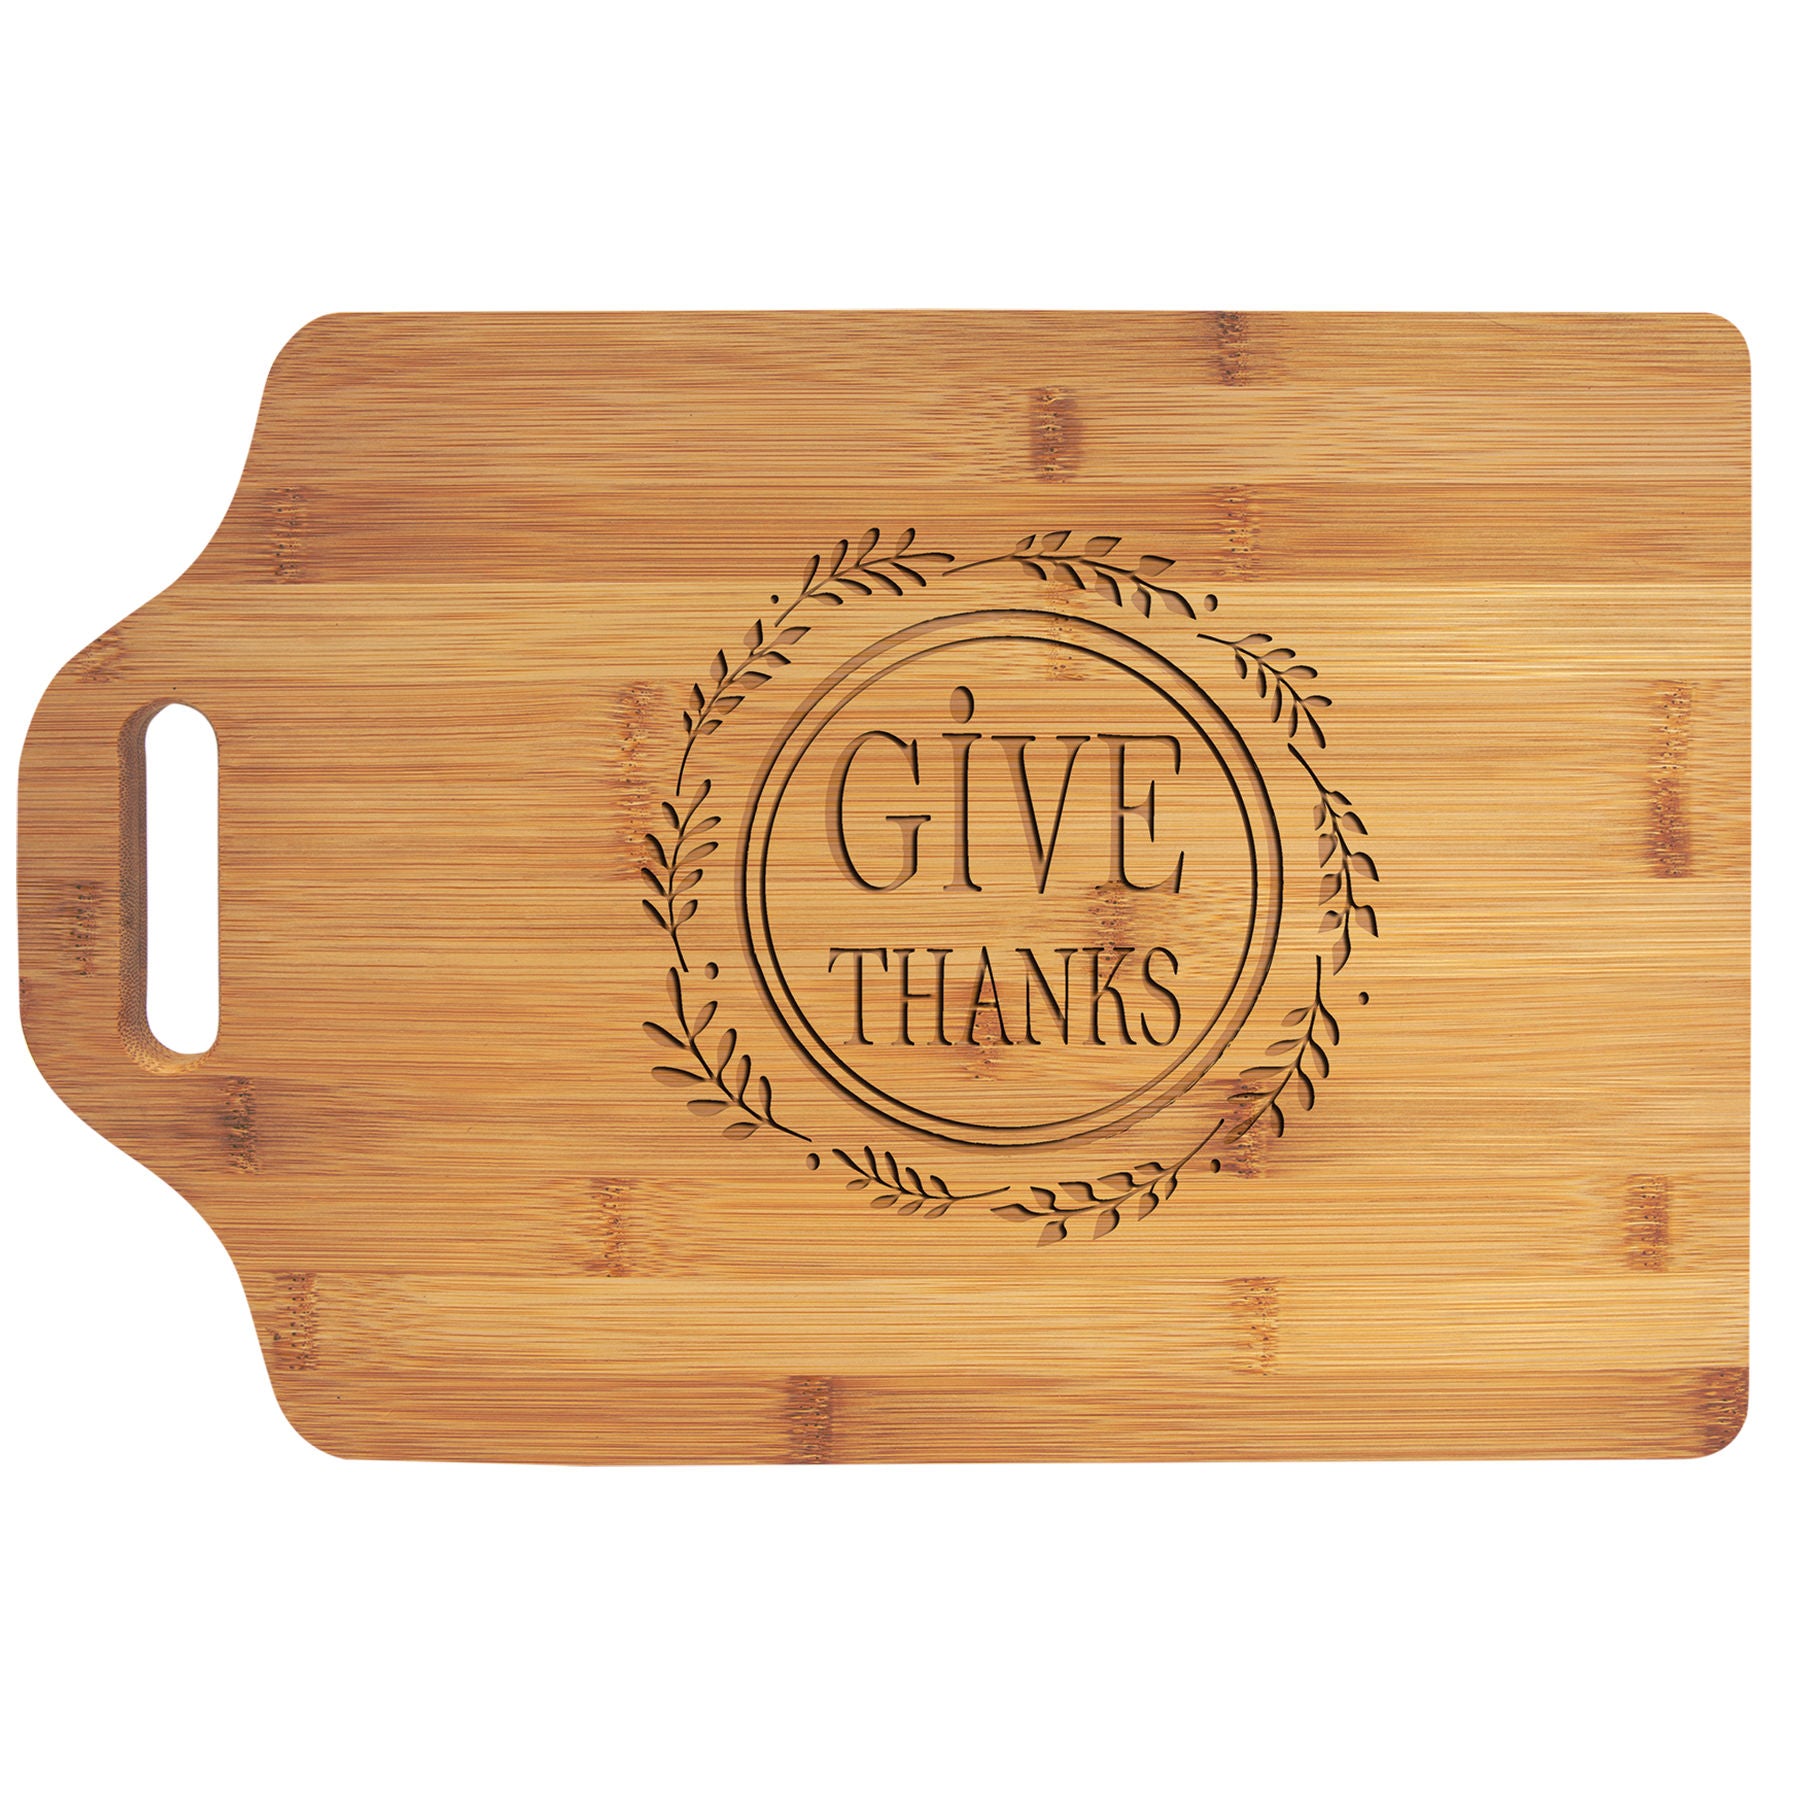 15" x 10 1/4" Bamboo Cutting Board with Handle - The Salty Lick Mercantile